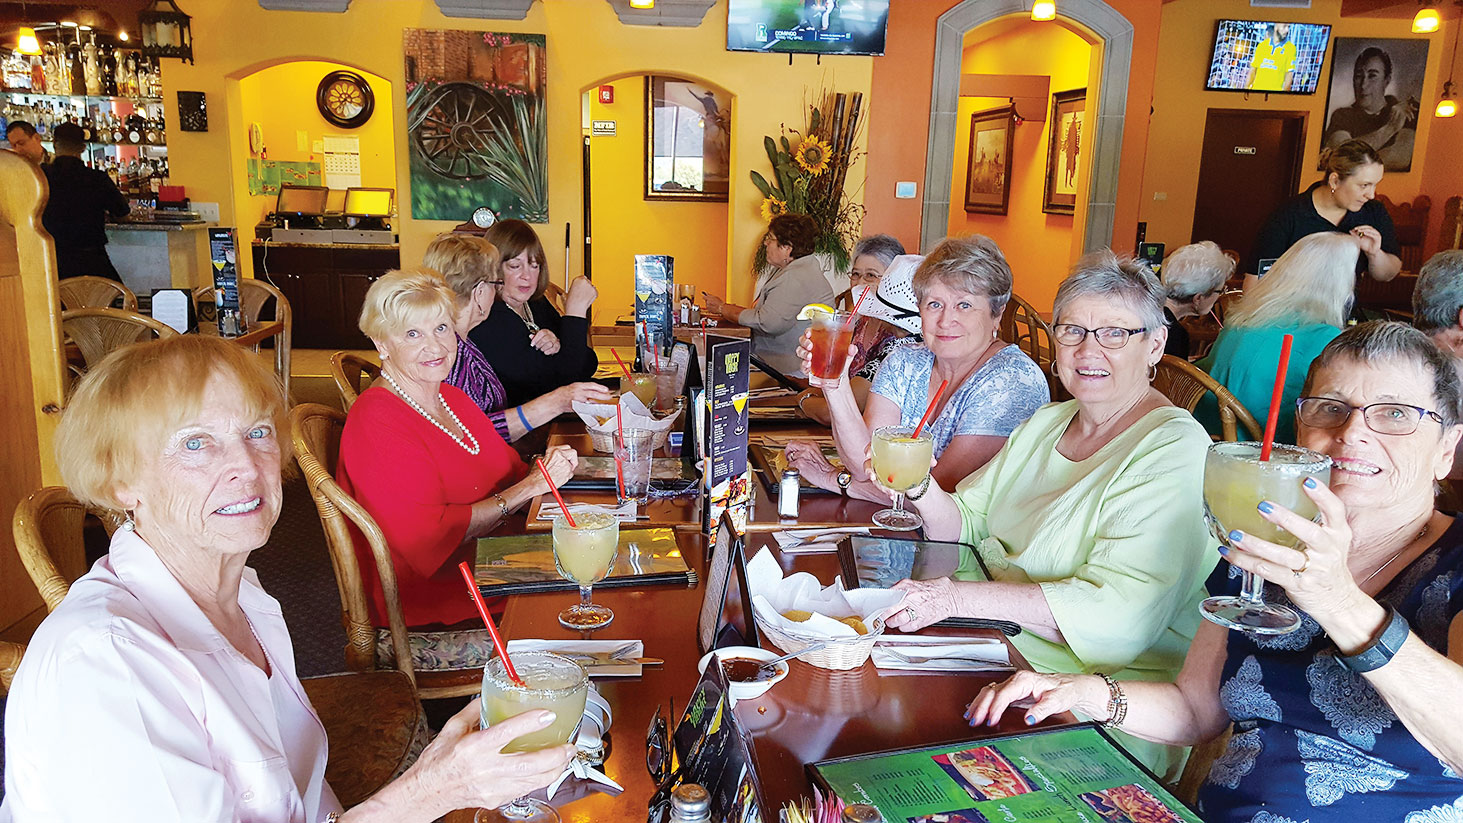 The chance to gather with friends brought smiles all around at the luncheon at La Hacienda.